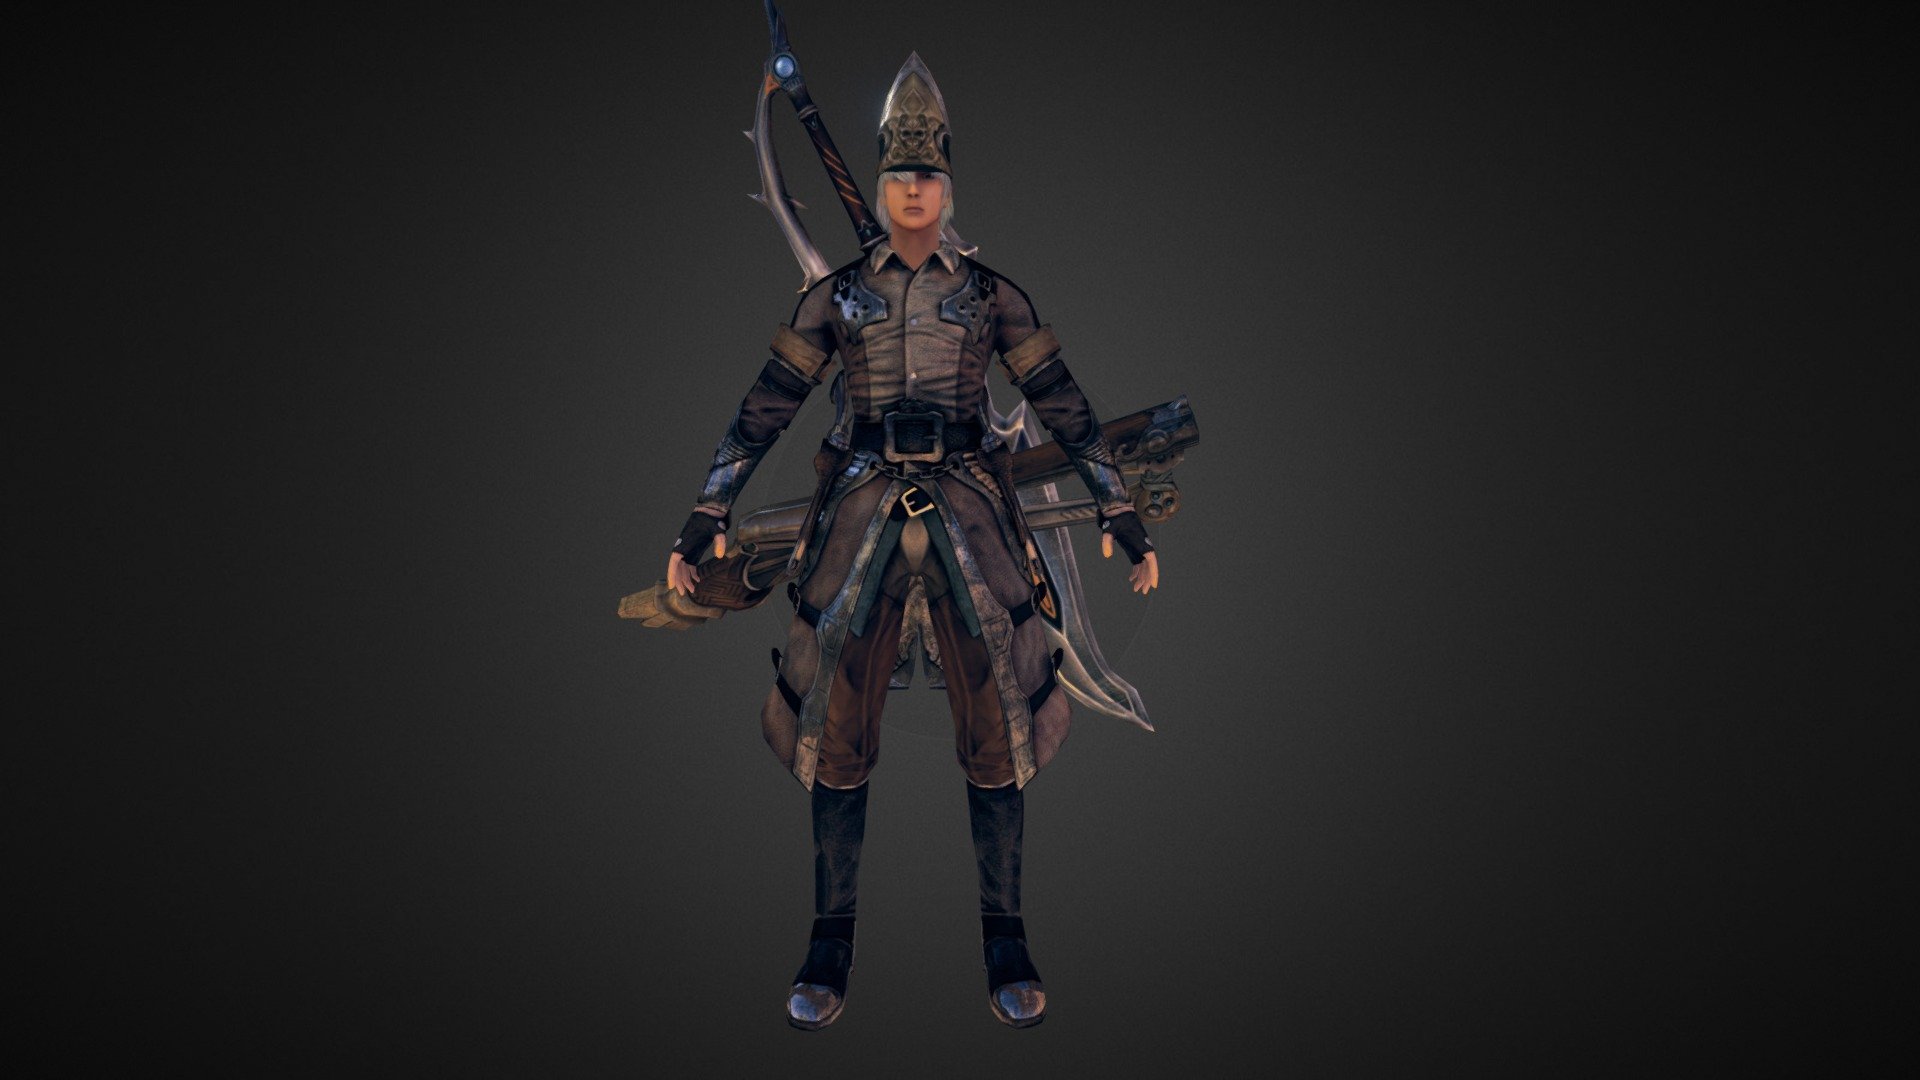 You can buy this model here: -link removed- - Nexgen game model- Warrior - 3D model by blake_seow 3d model